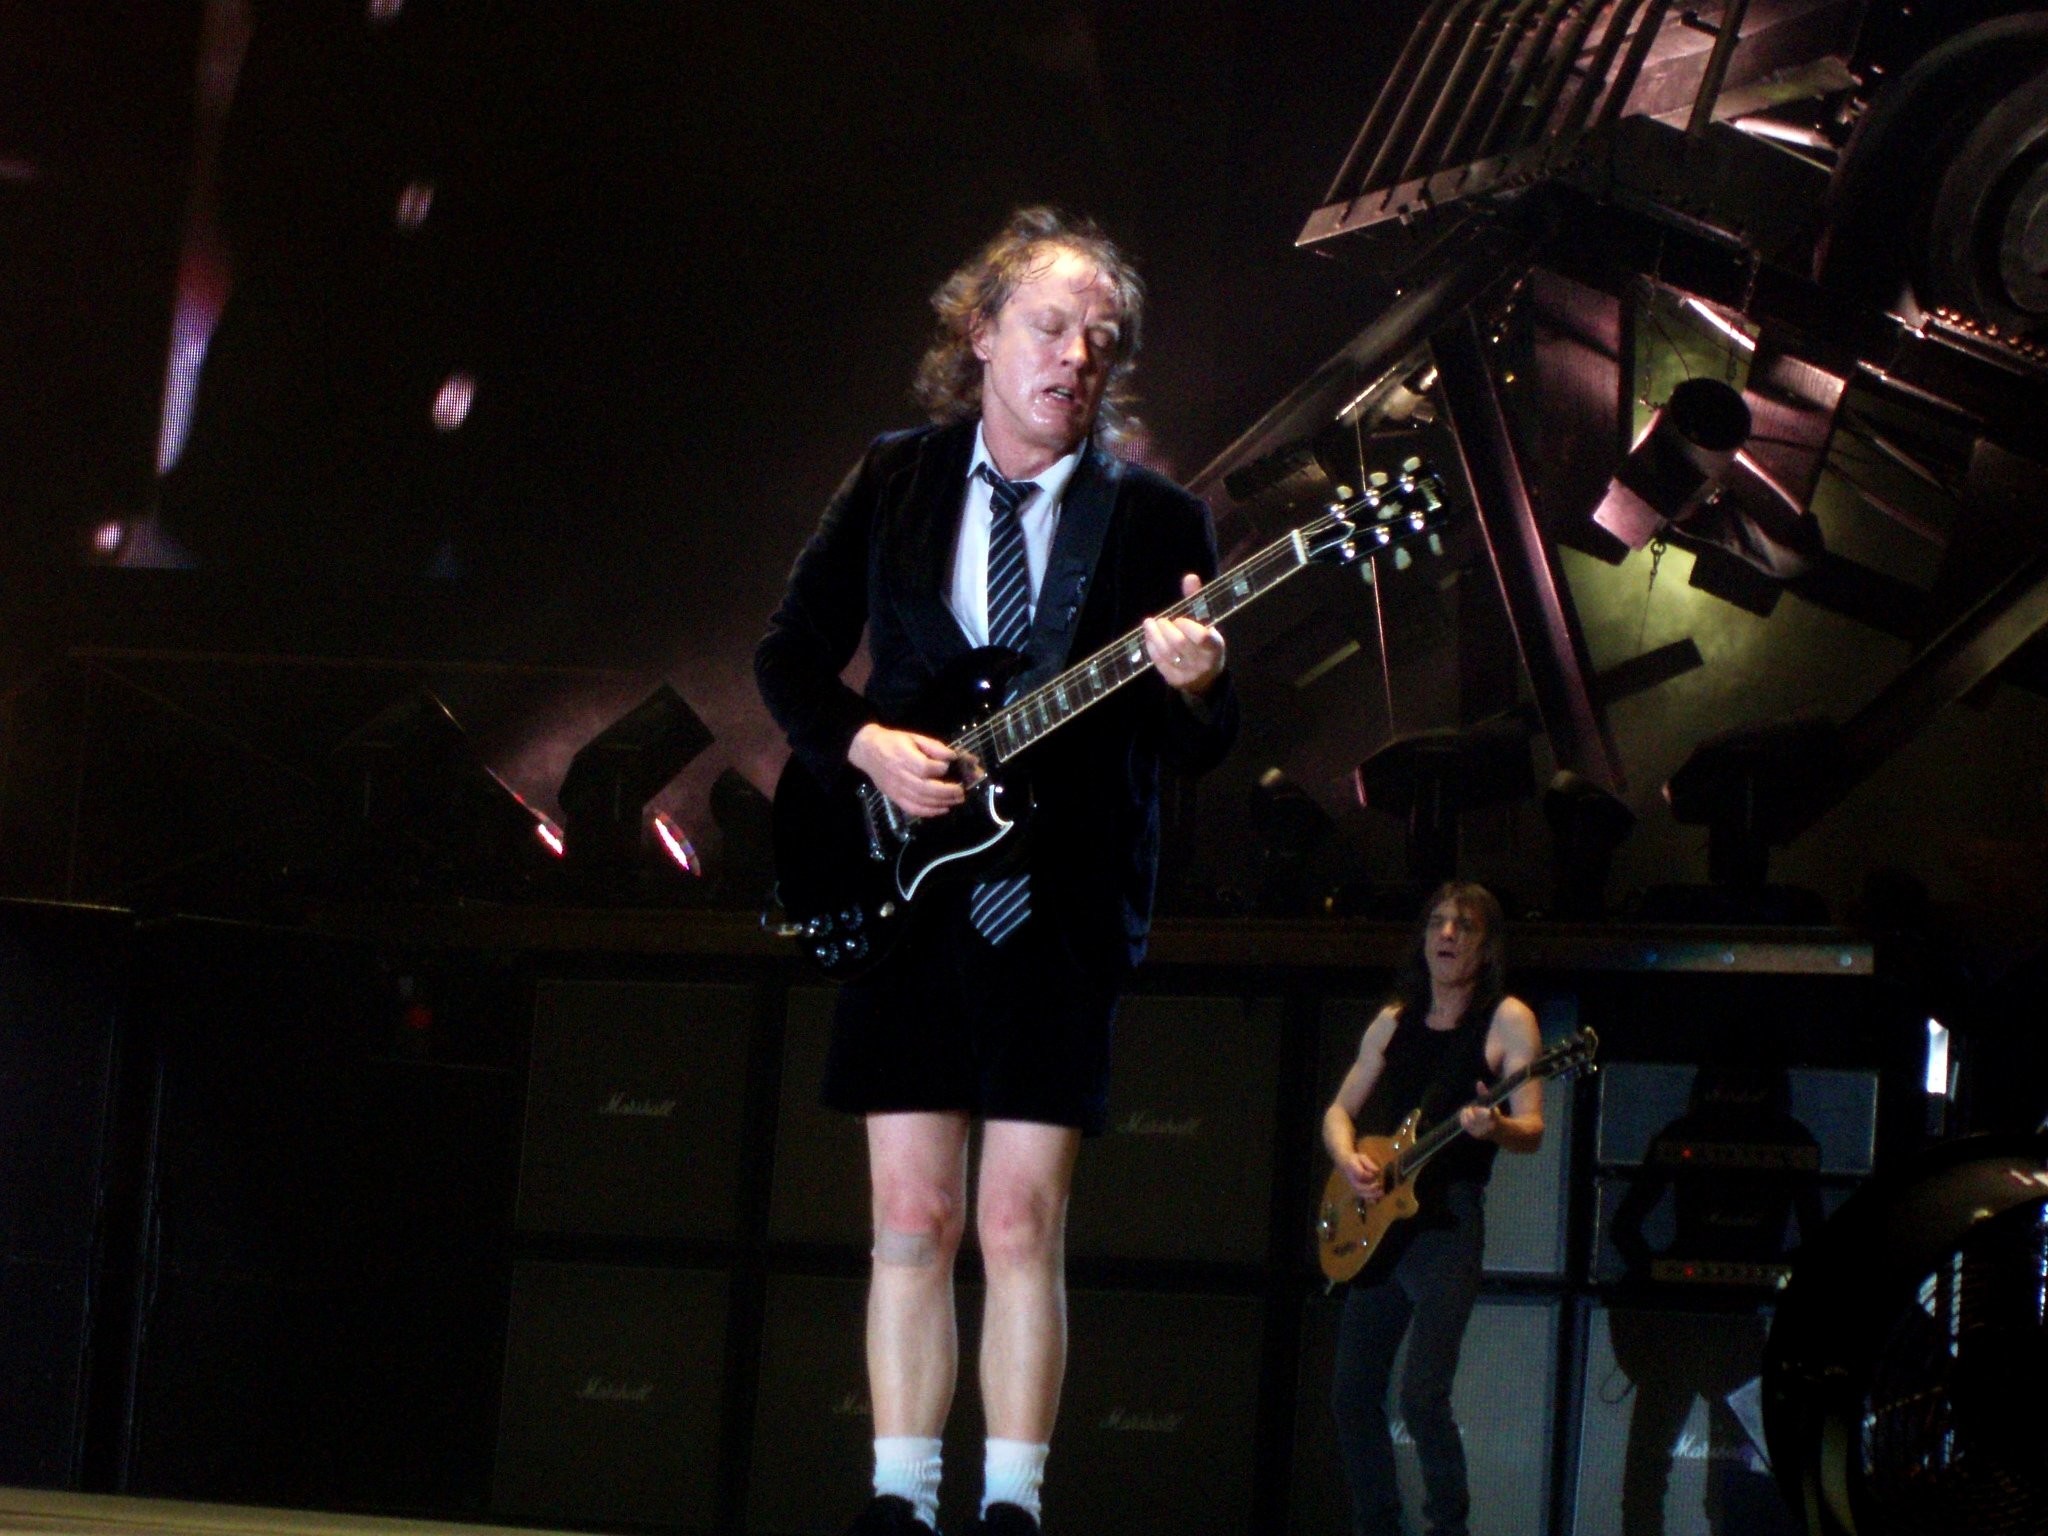 2048x1536 Angus Young 2 by anczaa ...